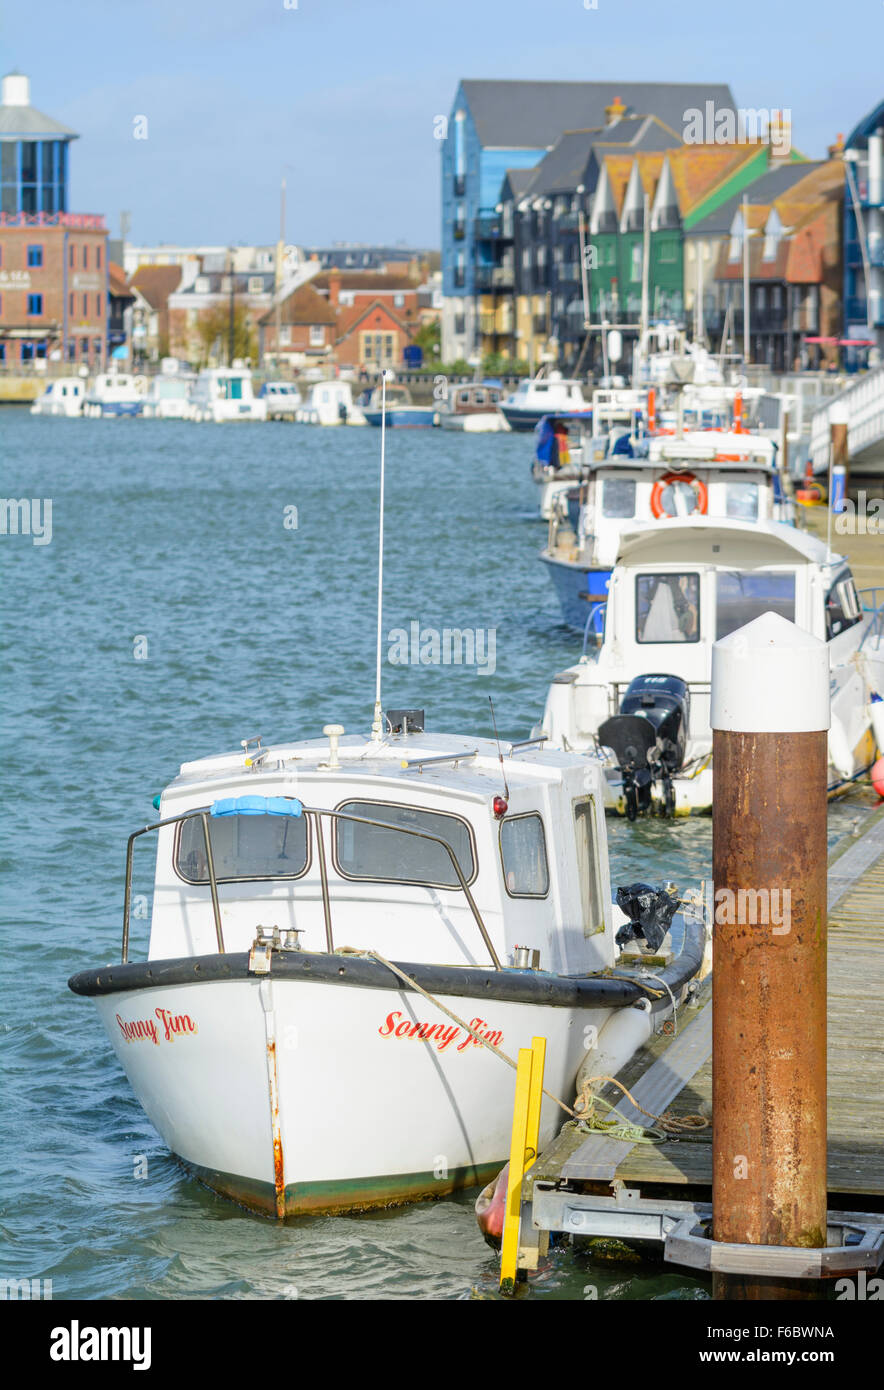 Boats moored up on the River Arun at Littlehampton, West Sussex, England, UK. Stock Photo